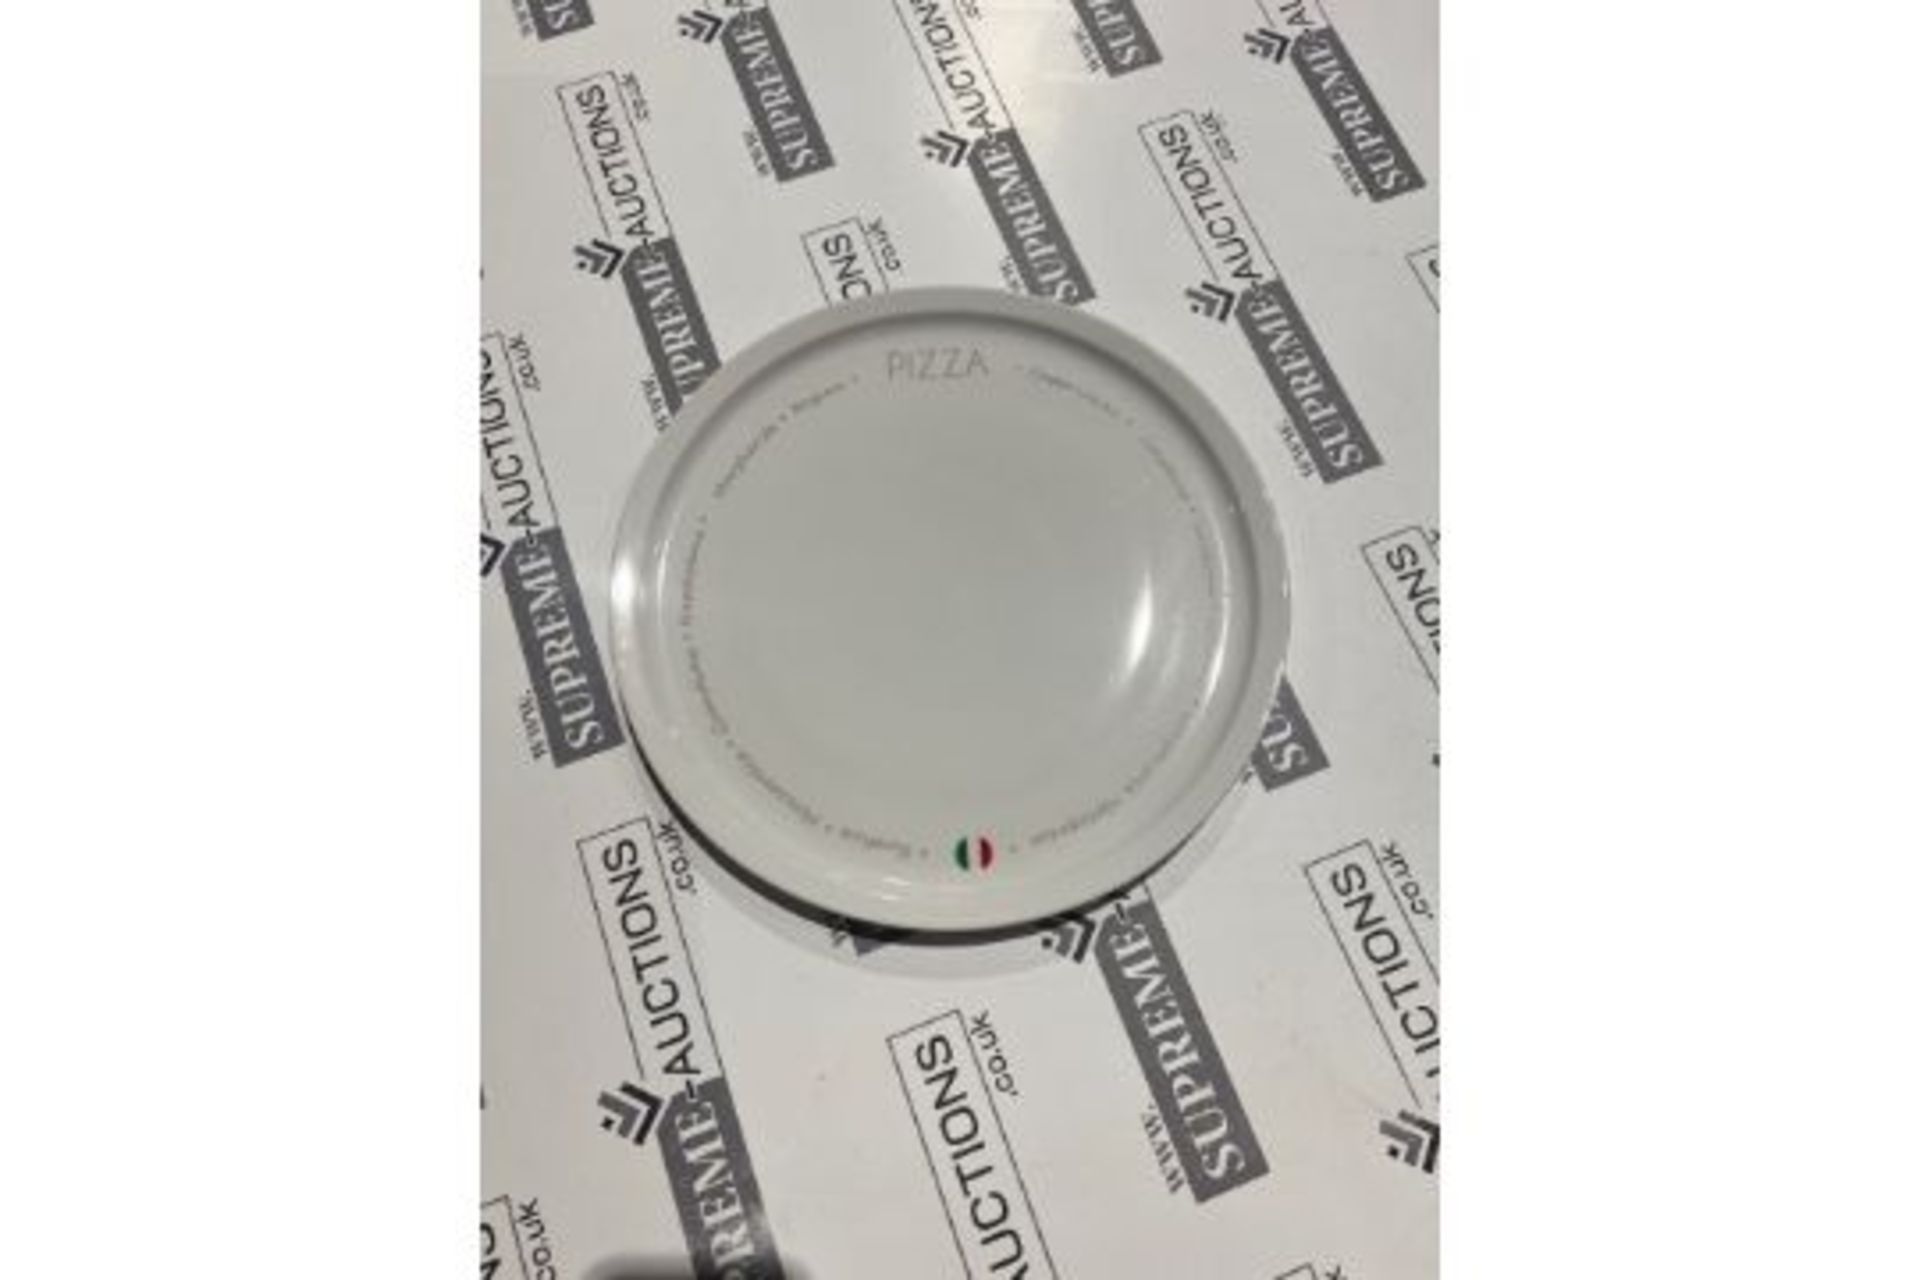 TRADE LOT TO CONTAIN 360 X BRAND NEW ARTMADIS NOVASTYL PIZZA ROUND PLATES WITH FLAG DETAIL,